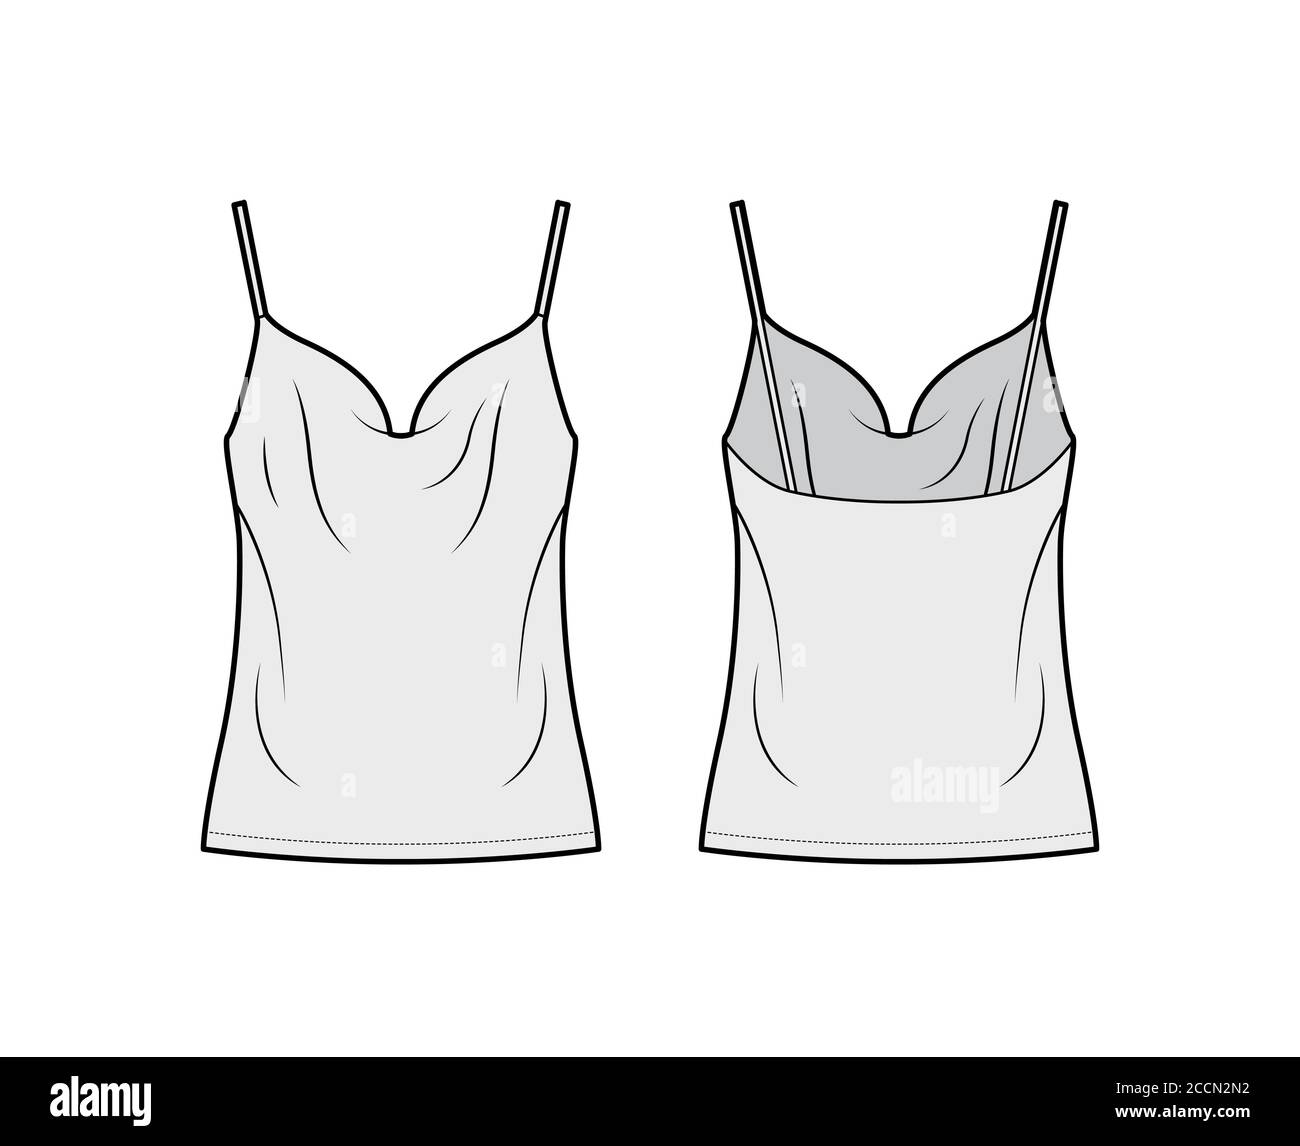 Camisole Technical Fashion Illustration With Vintage-inspired Cowl Neckline,  Relaxed Fit, Tunic Length. Flat Outwear Tank Apparel Template Front, Grey  Color. Women, Men Unisex Shirt Top CAD Mockup Royalty Free SVG, Cliparts,  Vectors,